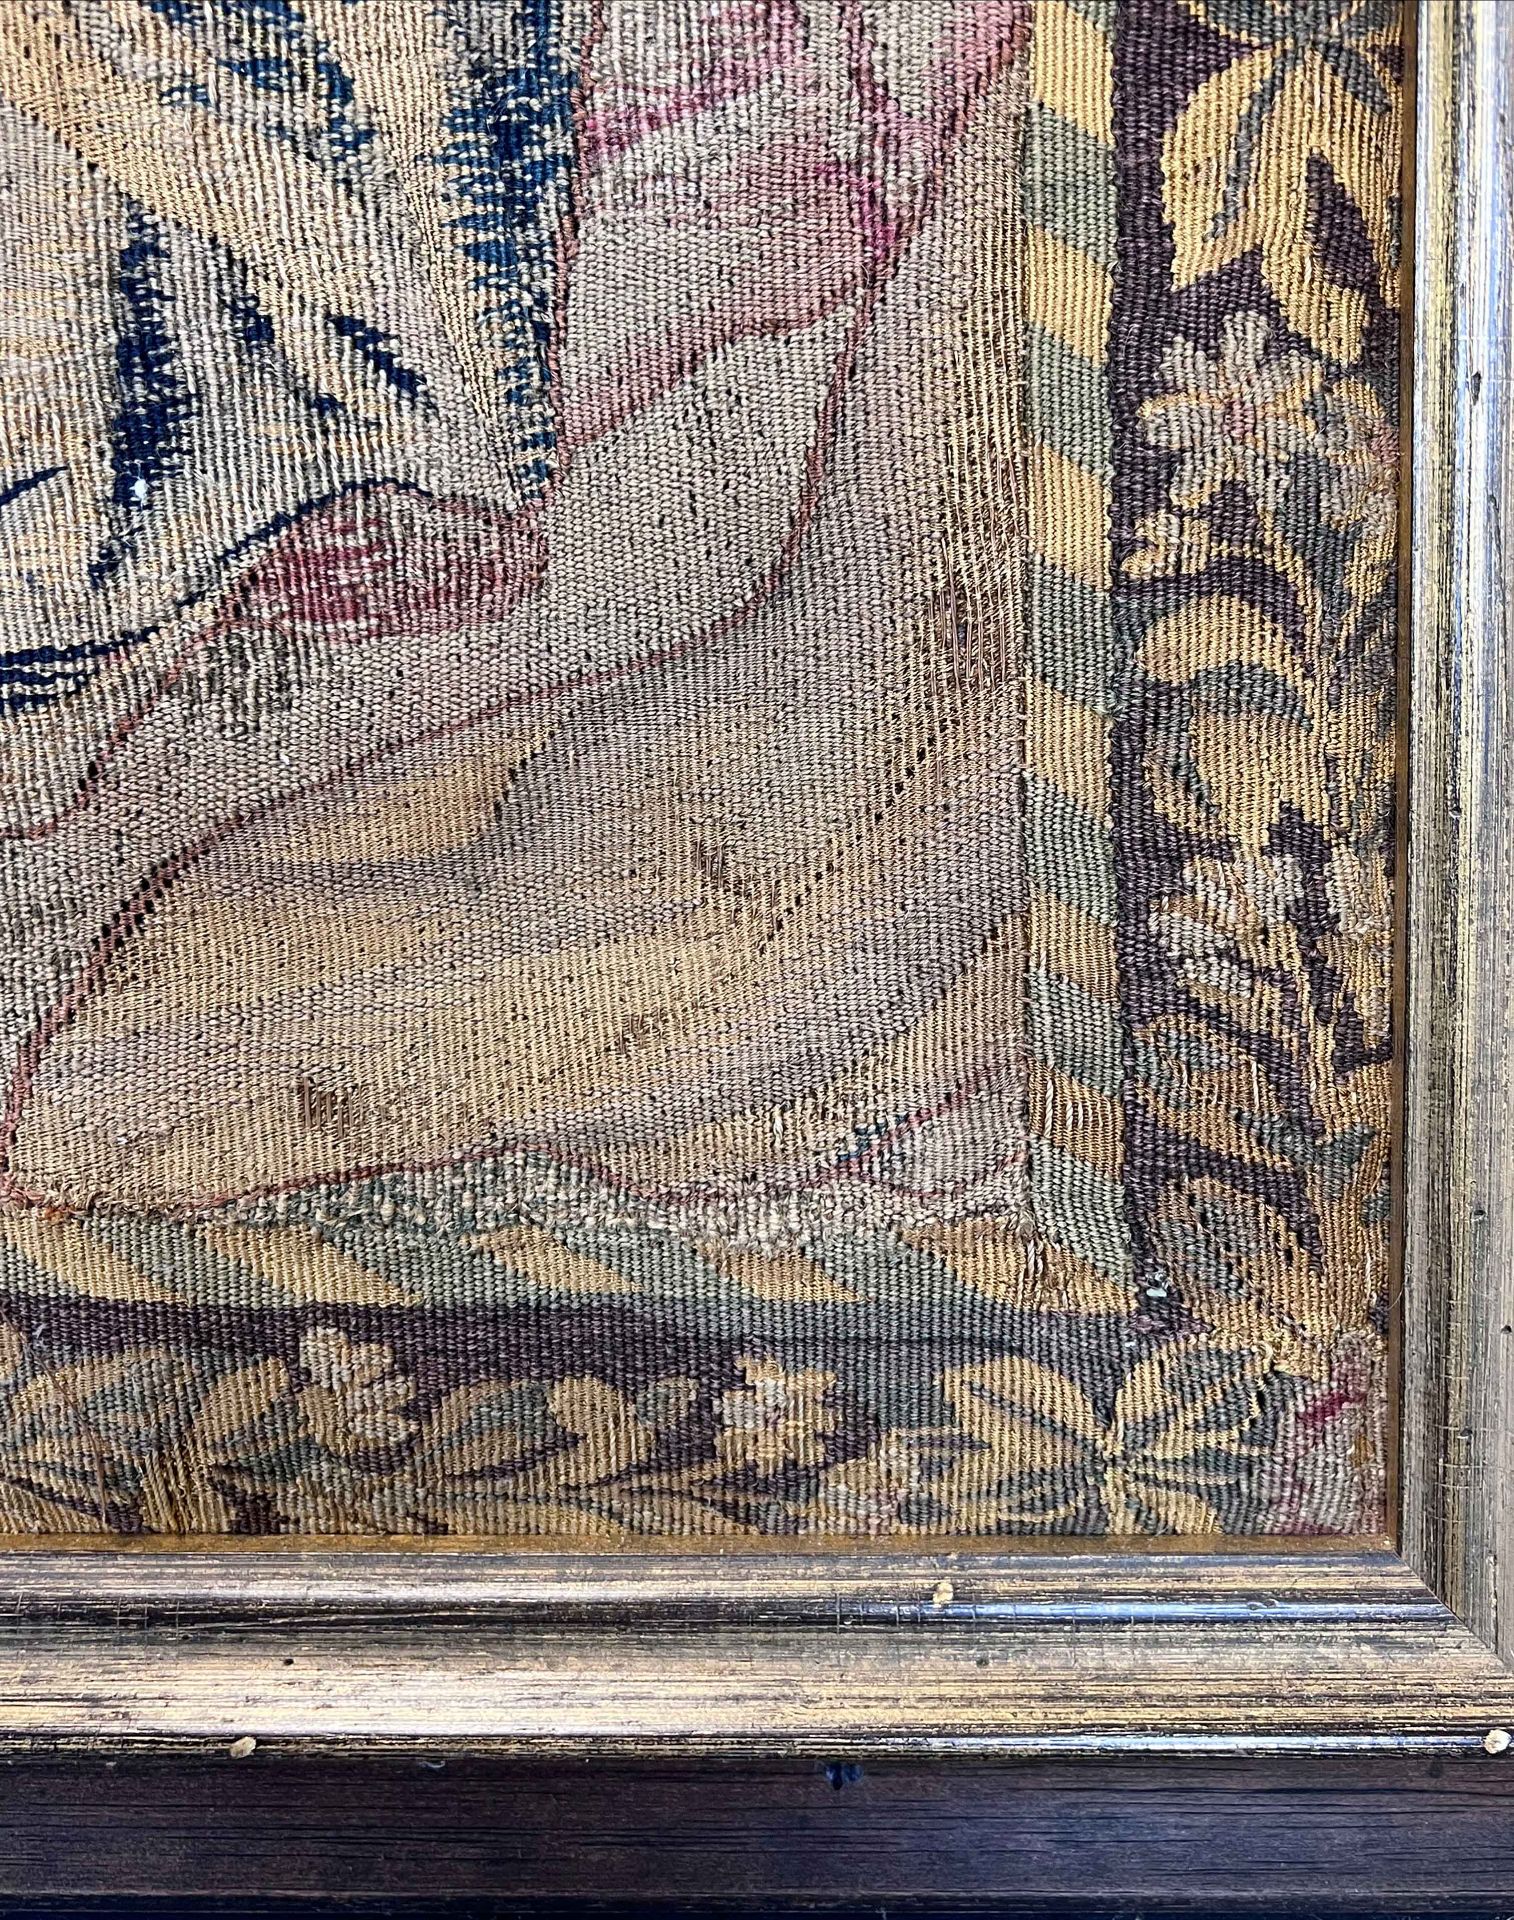 Tapestry. Southern Europe. Around 1900, after a medieval model. - Image 15 of 16